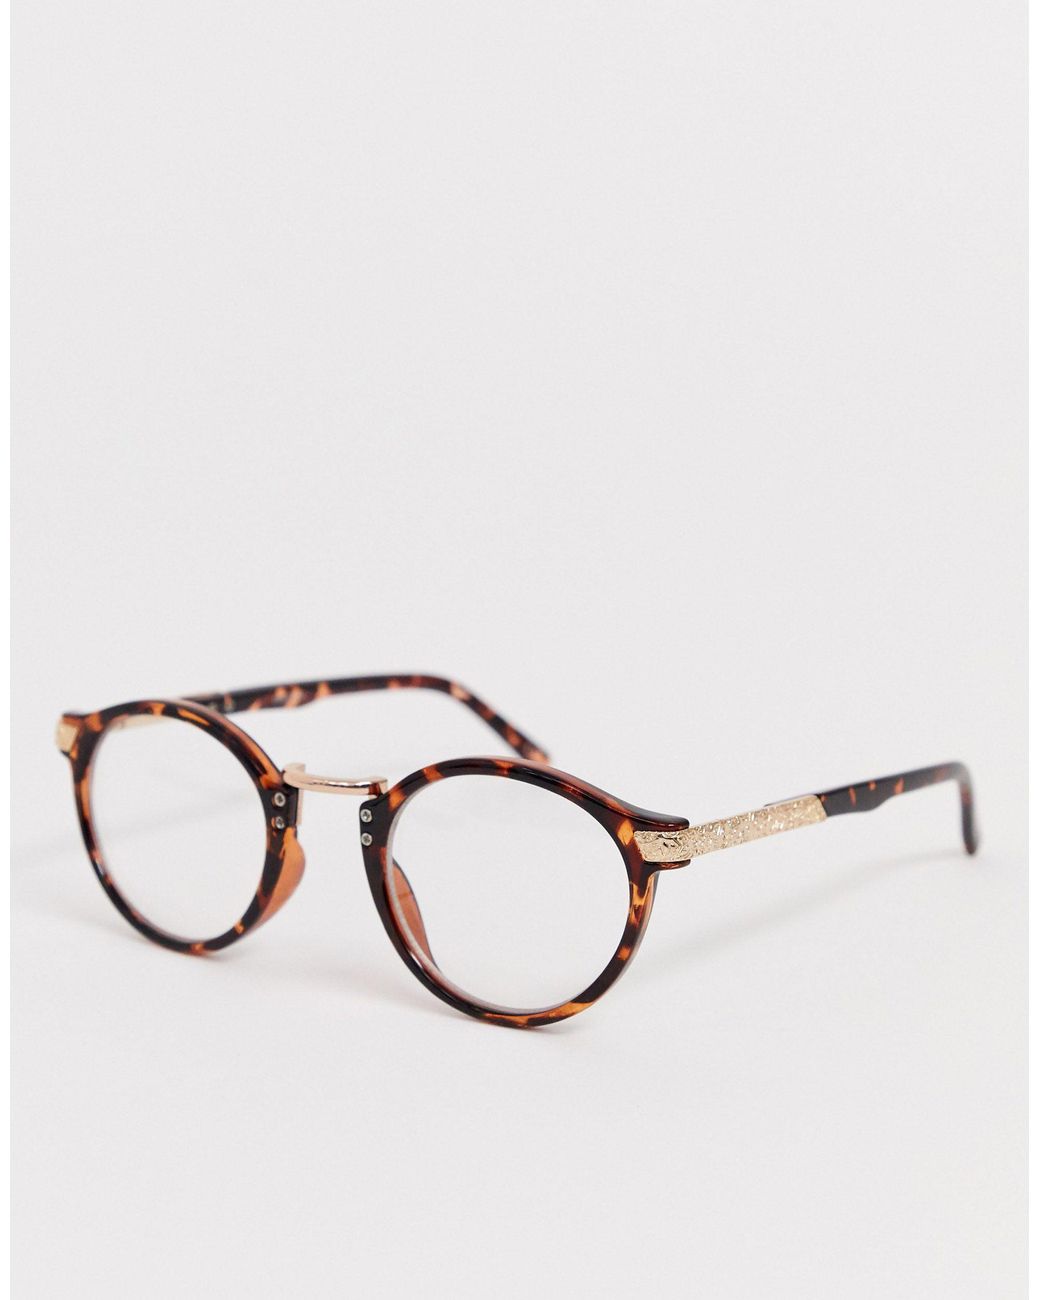 ASOS Vintage Round Clear Lens Glasses in Brown | Lyst